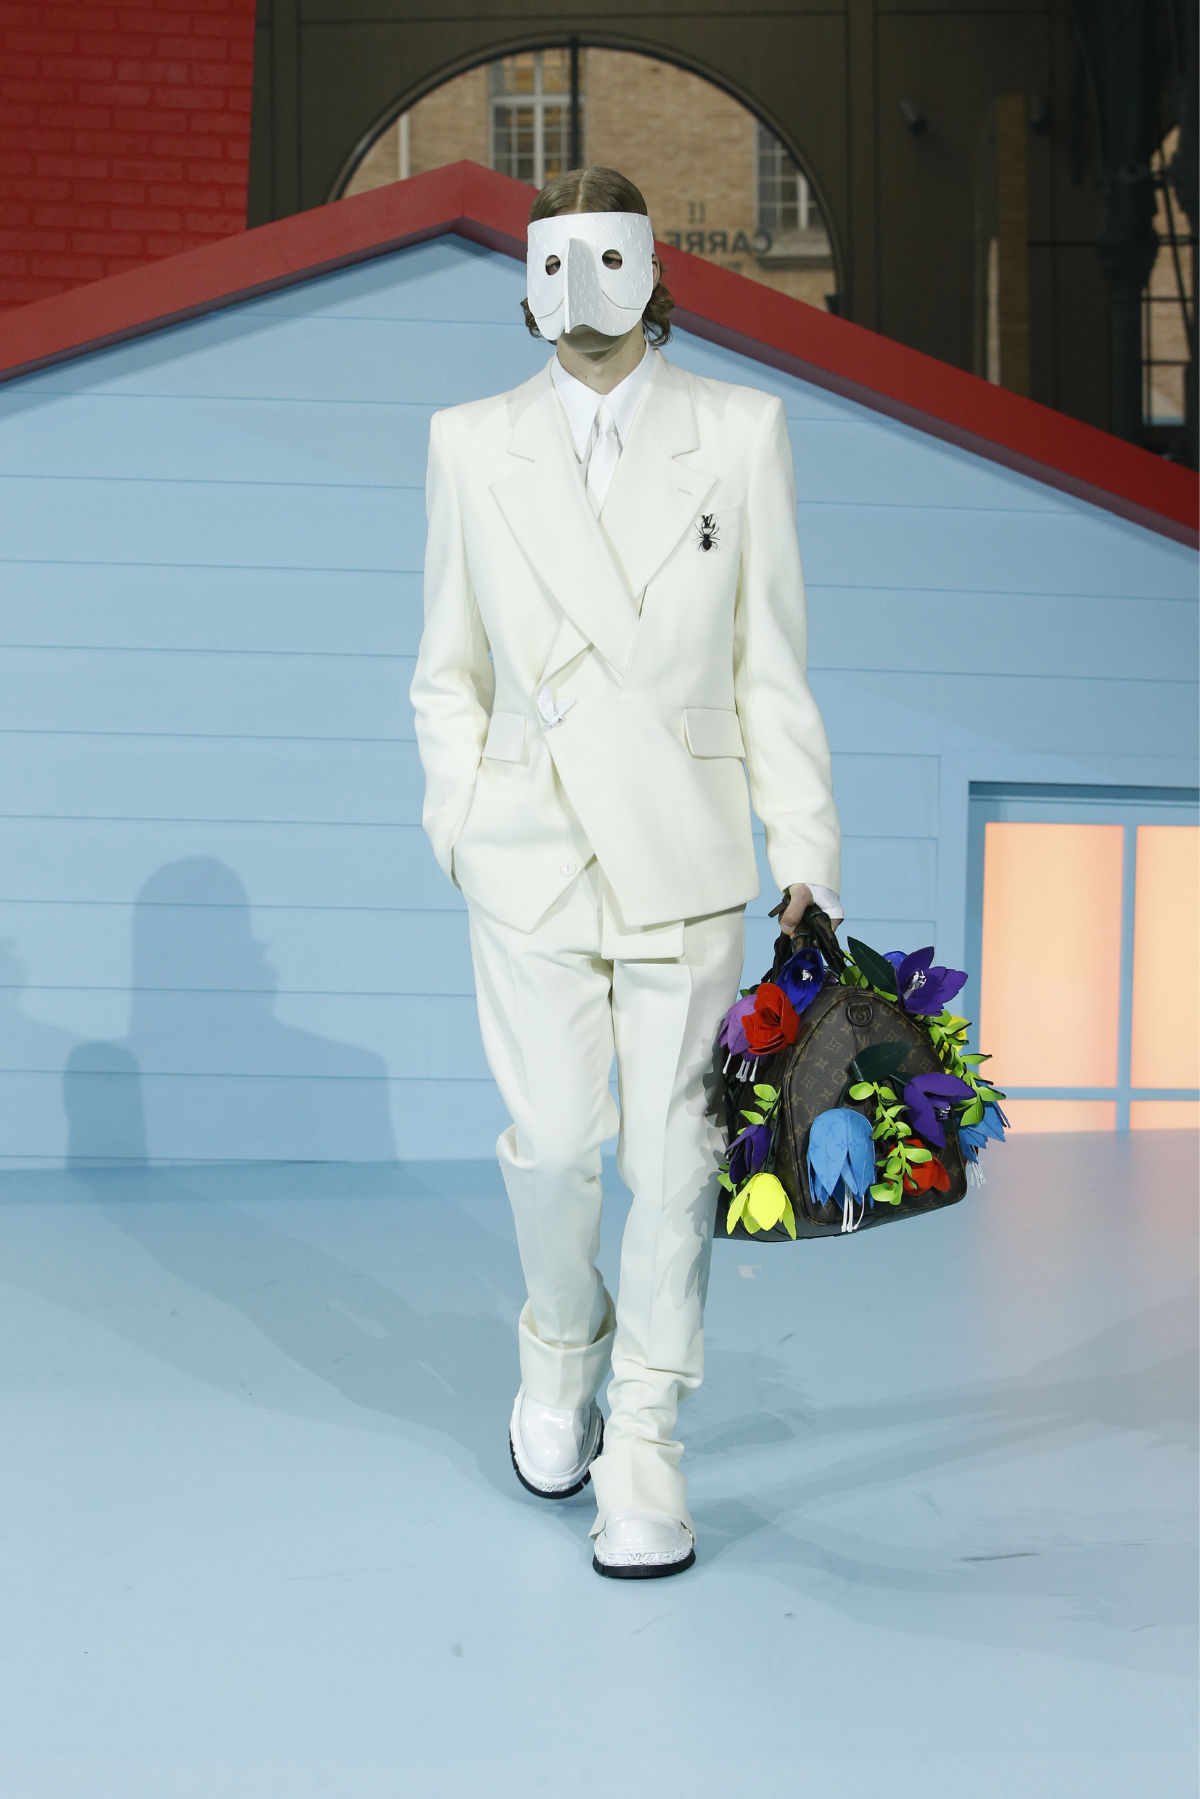 Louis Vuitton Presents Its New Fall-Winter 2022 Men’s Collection By Virgil Abloh